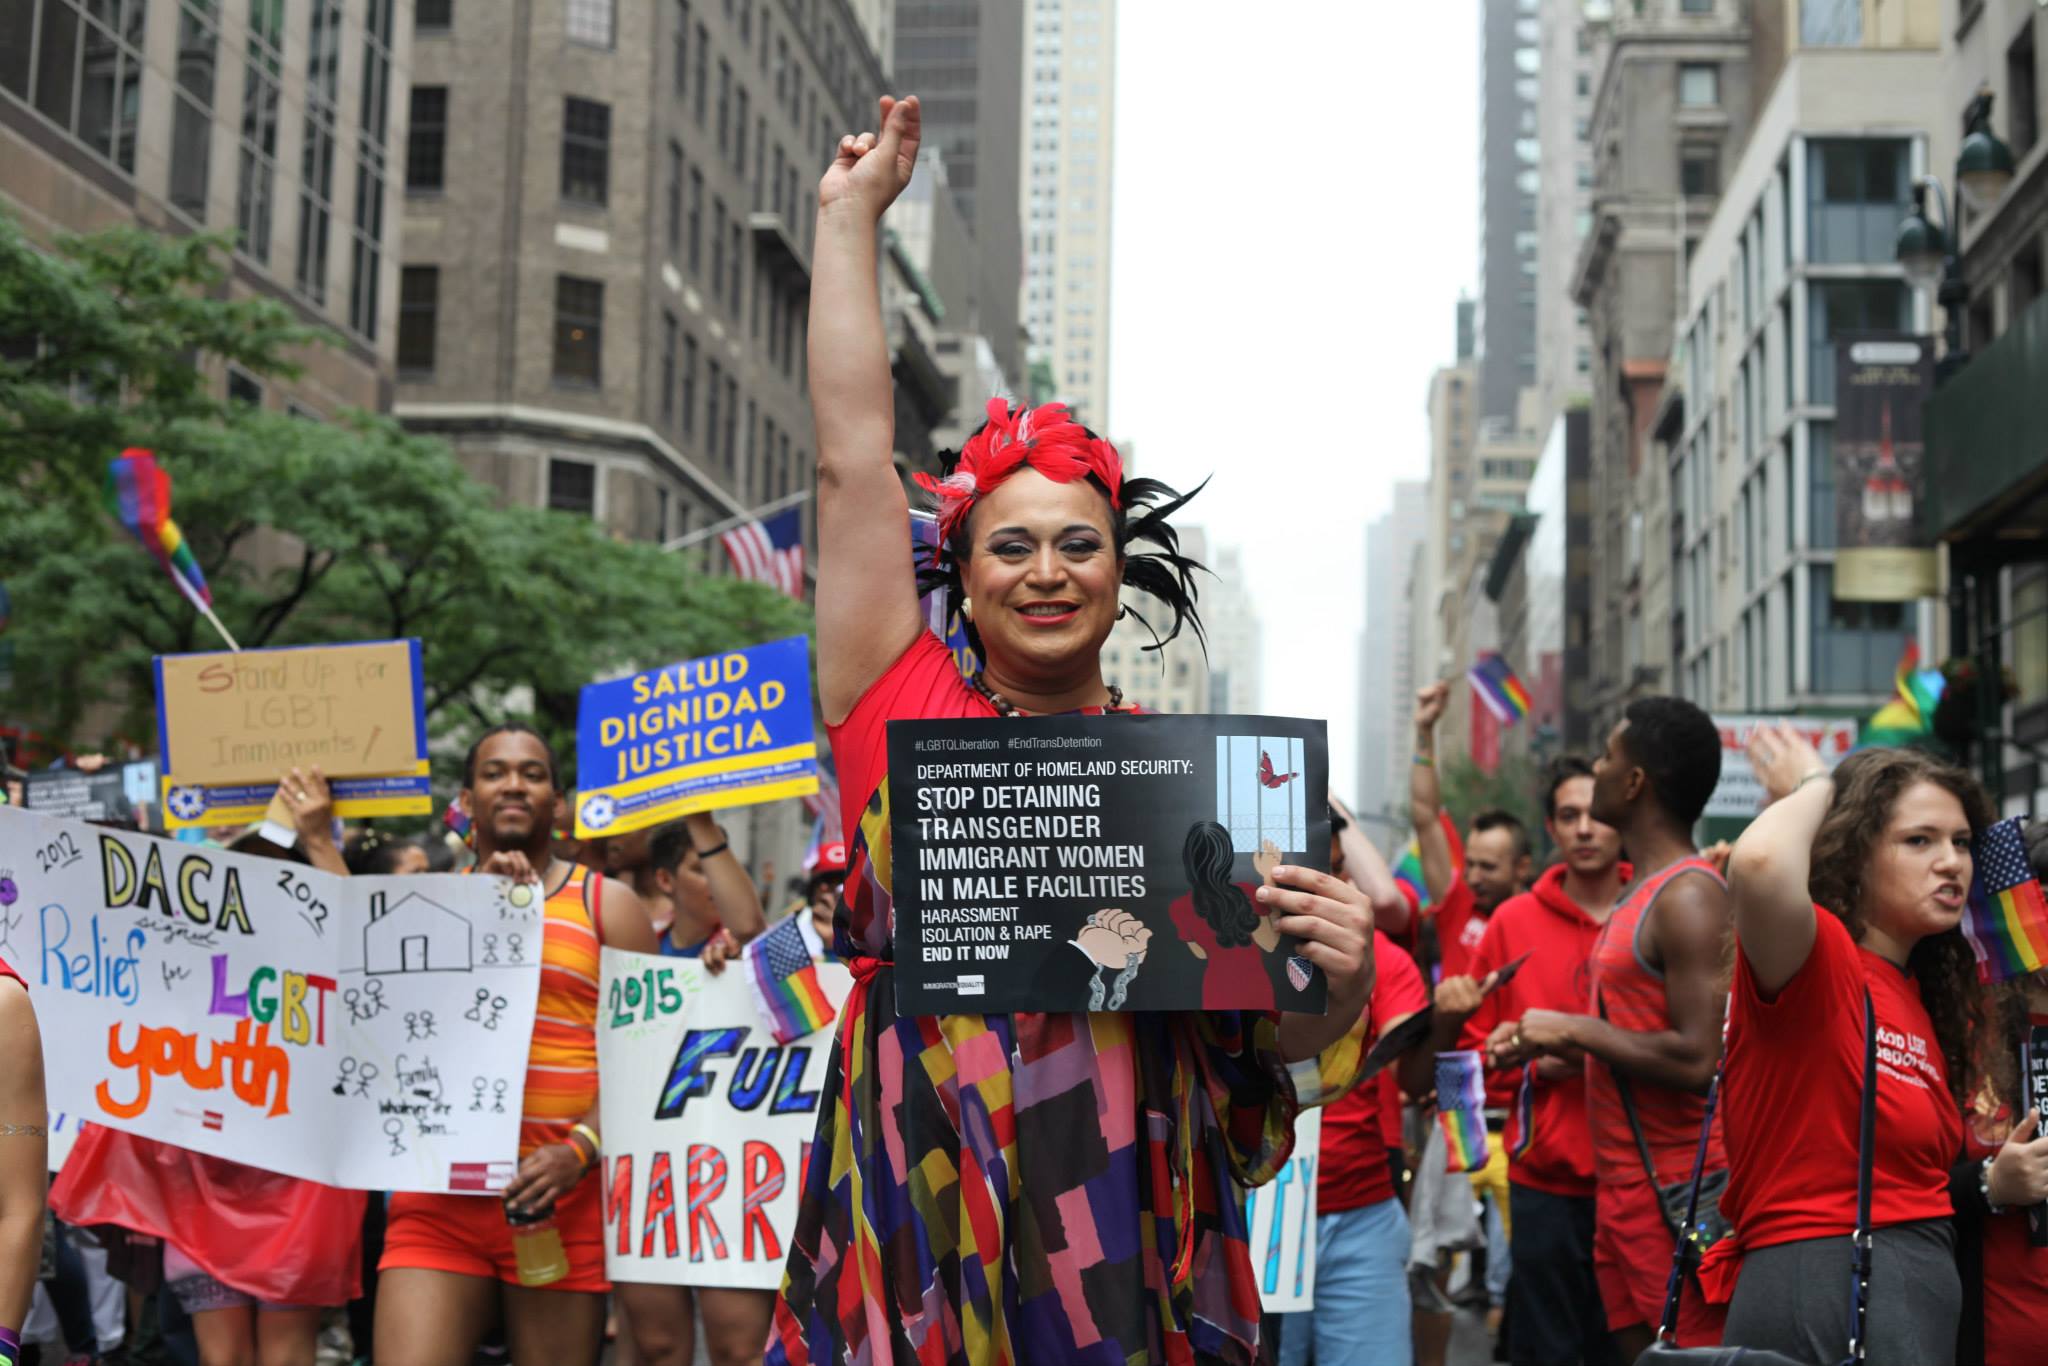 Ishalaa standing proudly with her fist in the air, in front of a protest advocating for LGBTQ rights